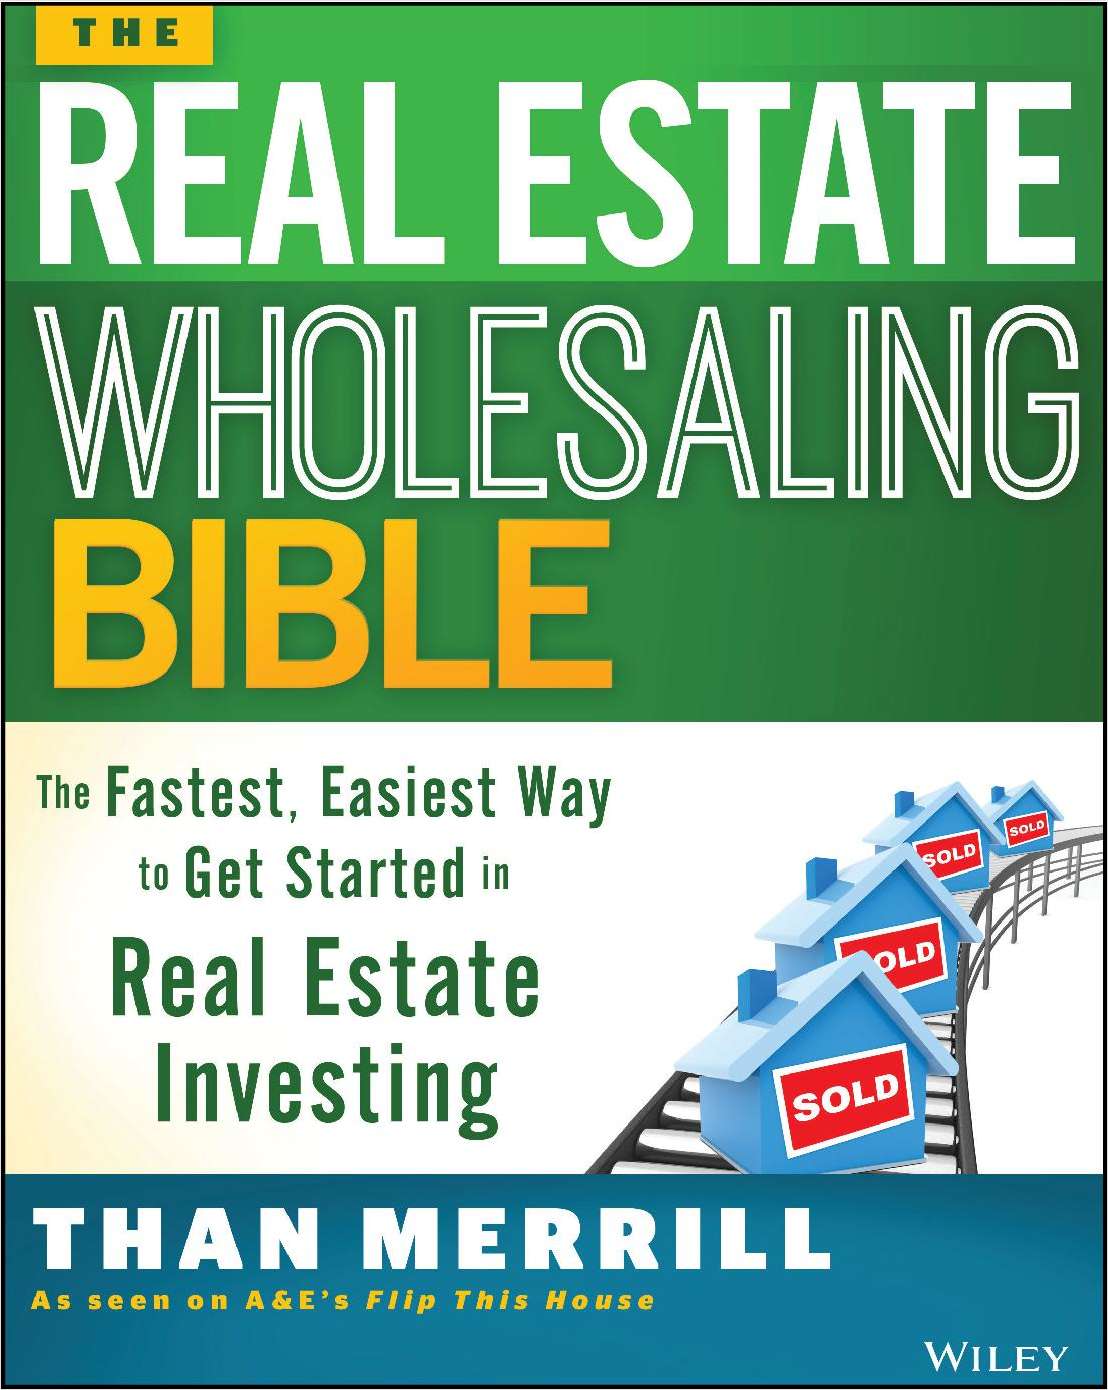 The Real Estate Wholesaling Bible: The Fastest, Easiest Way to Get Started in Real Estate Investing--Free Sample Chapter